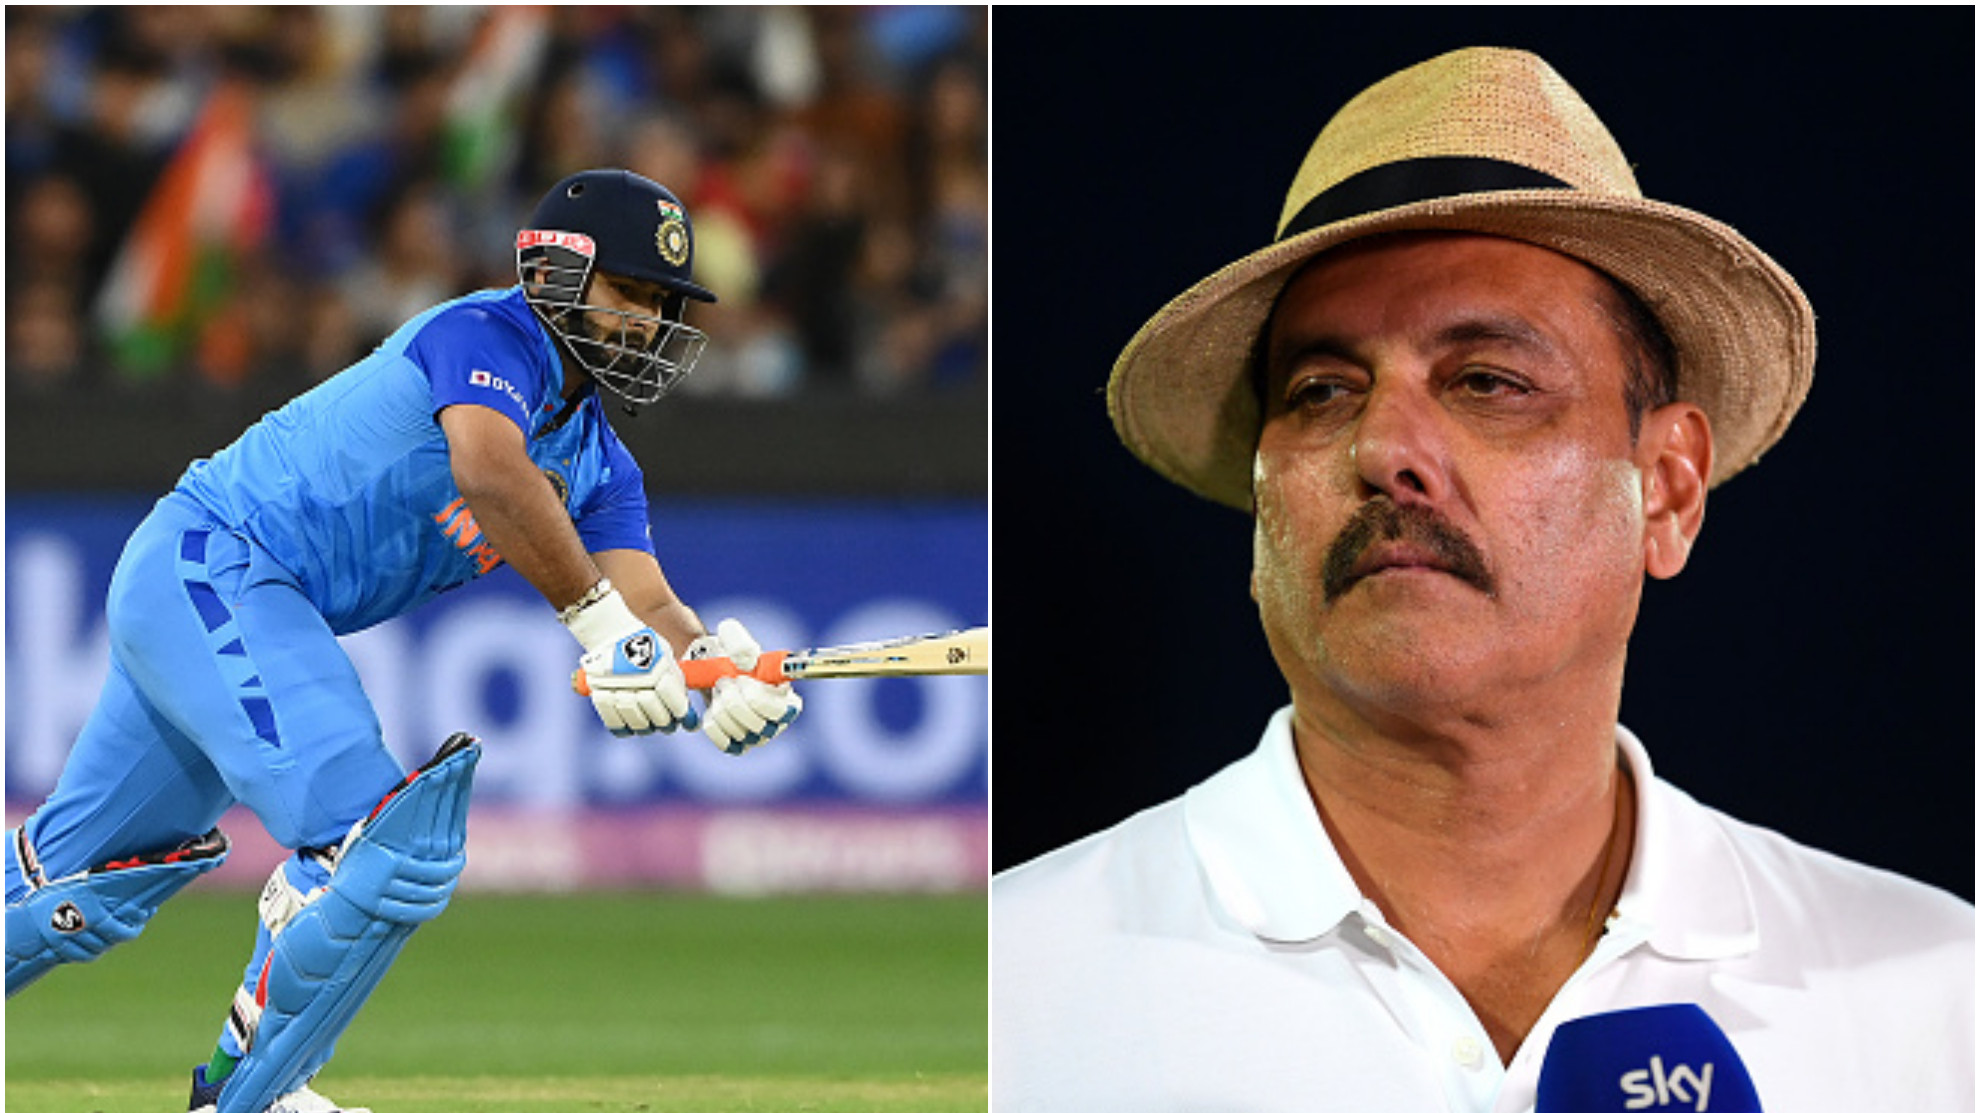 T20 World Cup 2022: “You need a robust left-hander against England,” Ravi Shastri backs Rishabh Pant to play semis